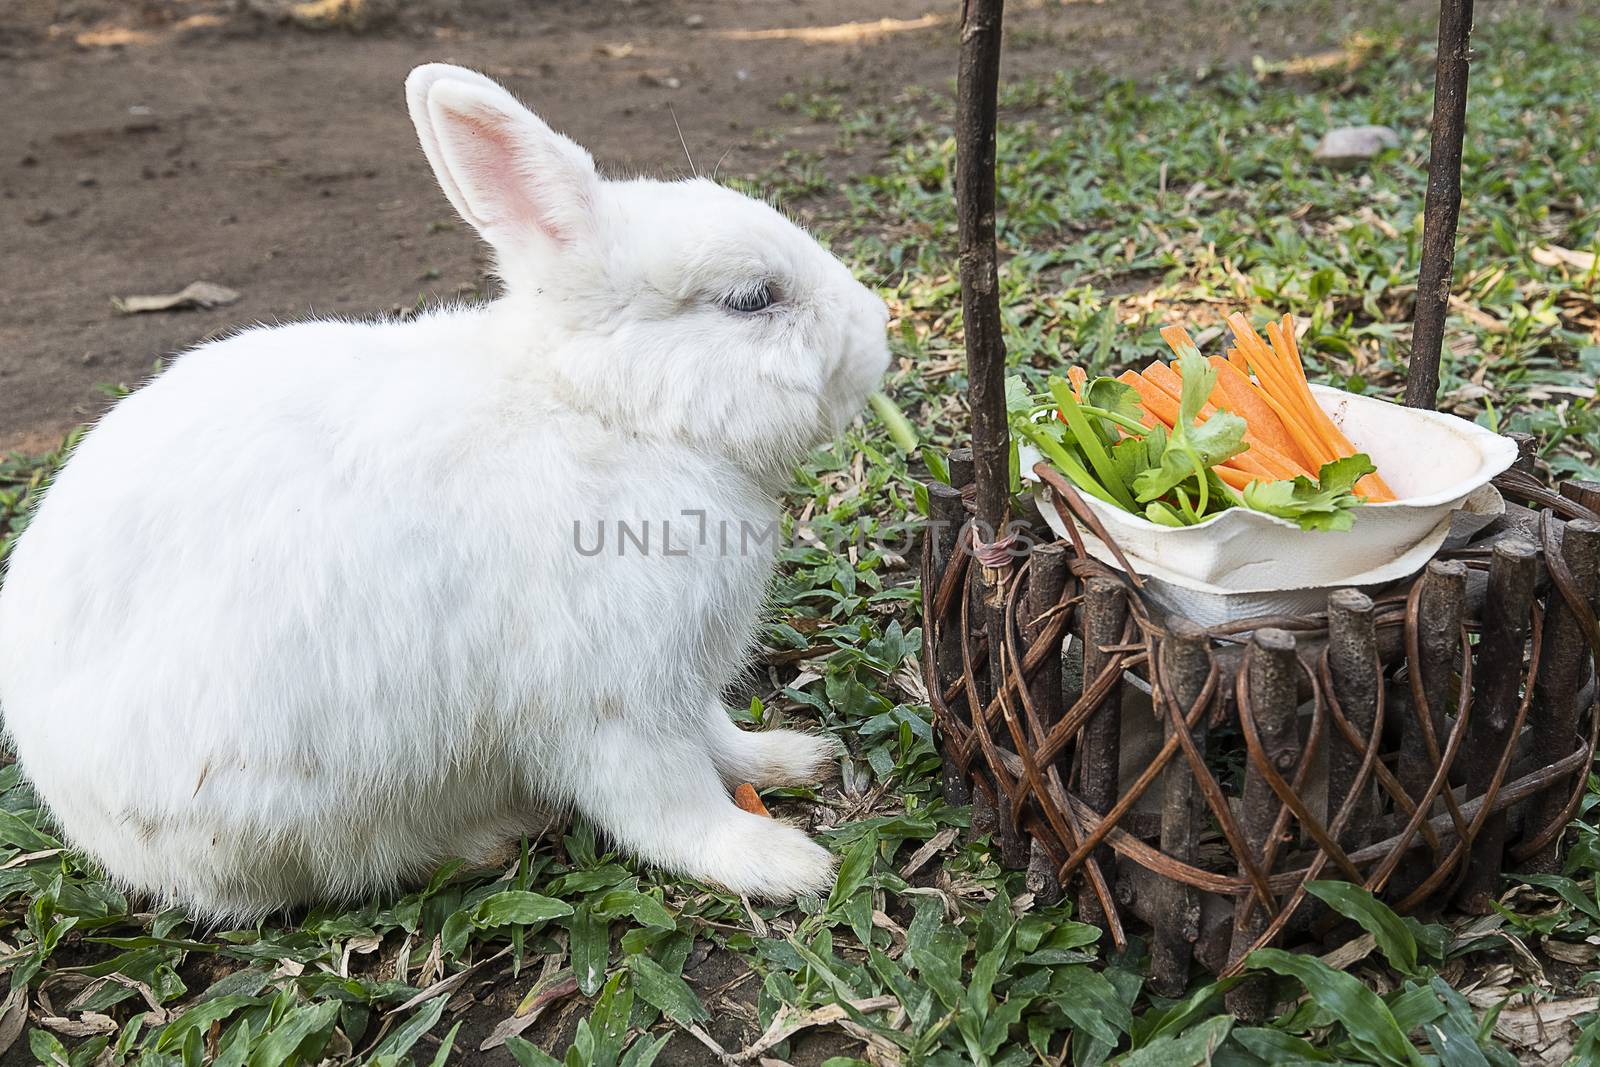 Cute little white bunny rabbit eating vegetable snack on a green lawn.